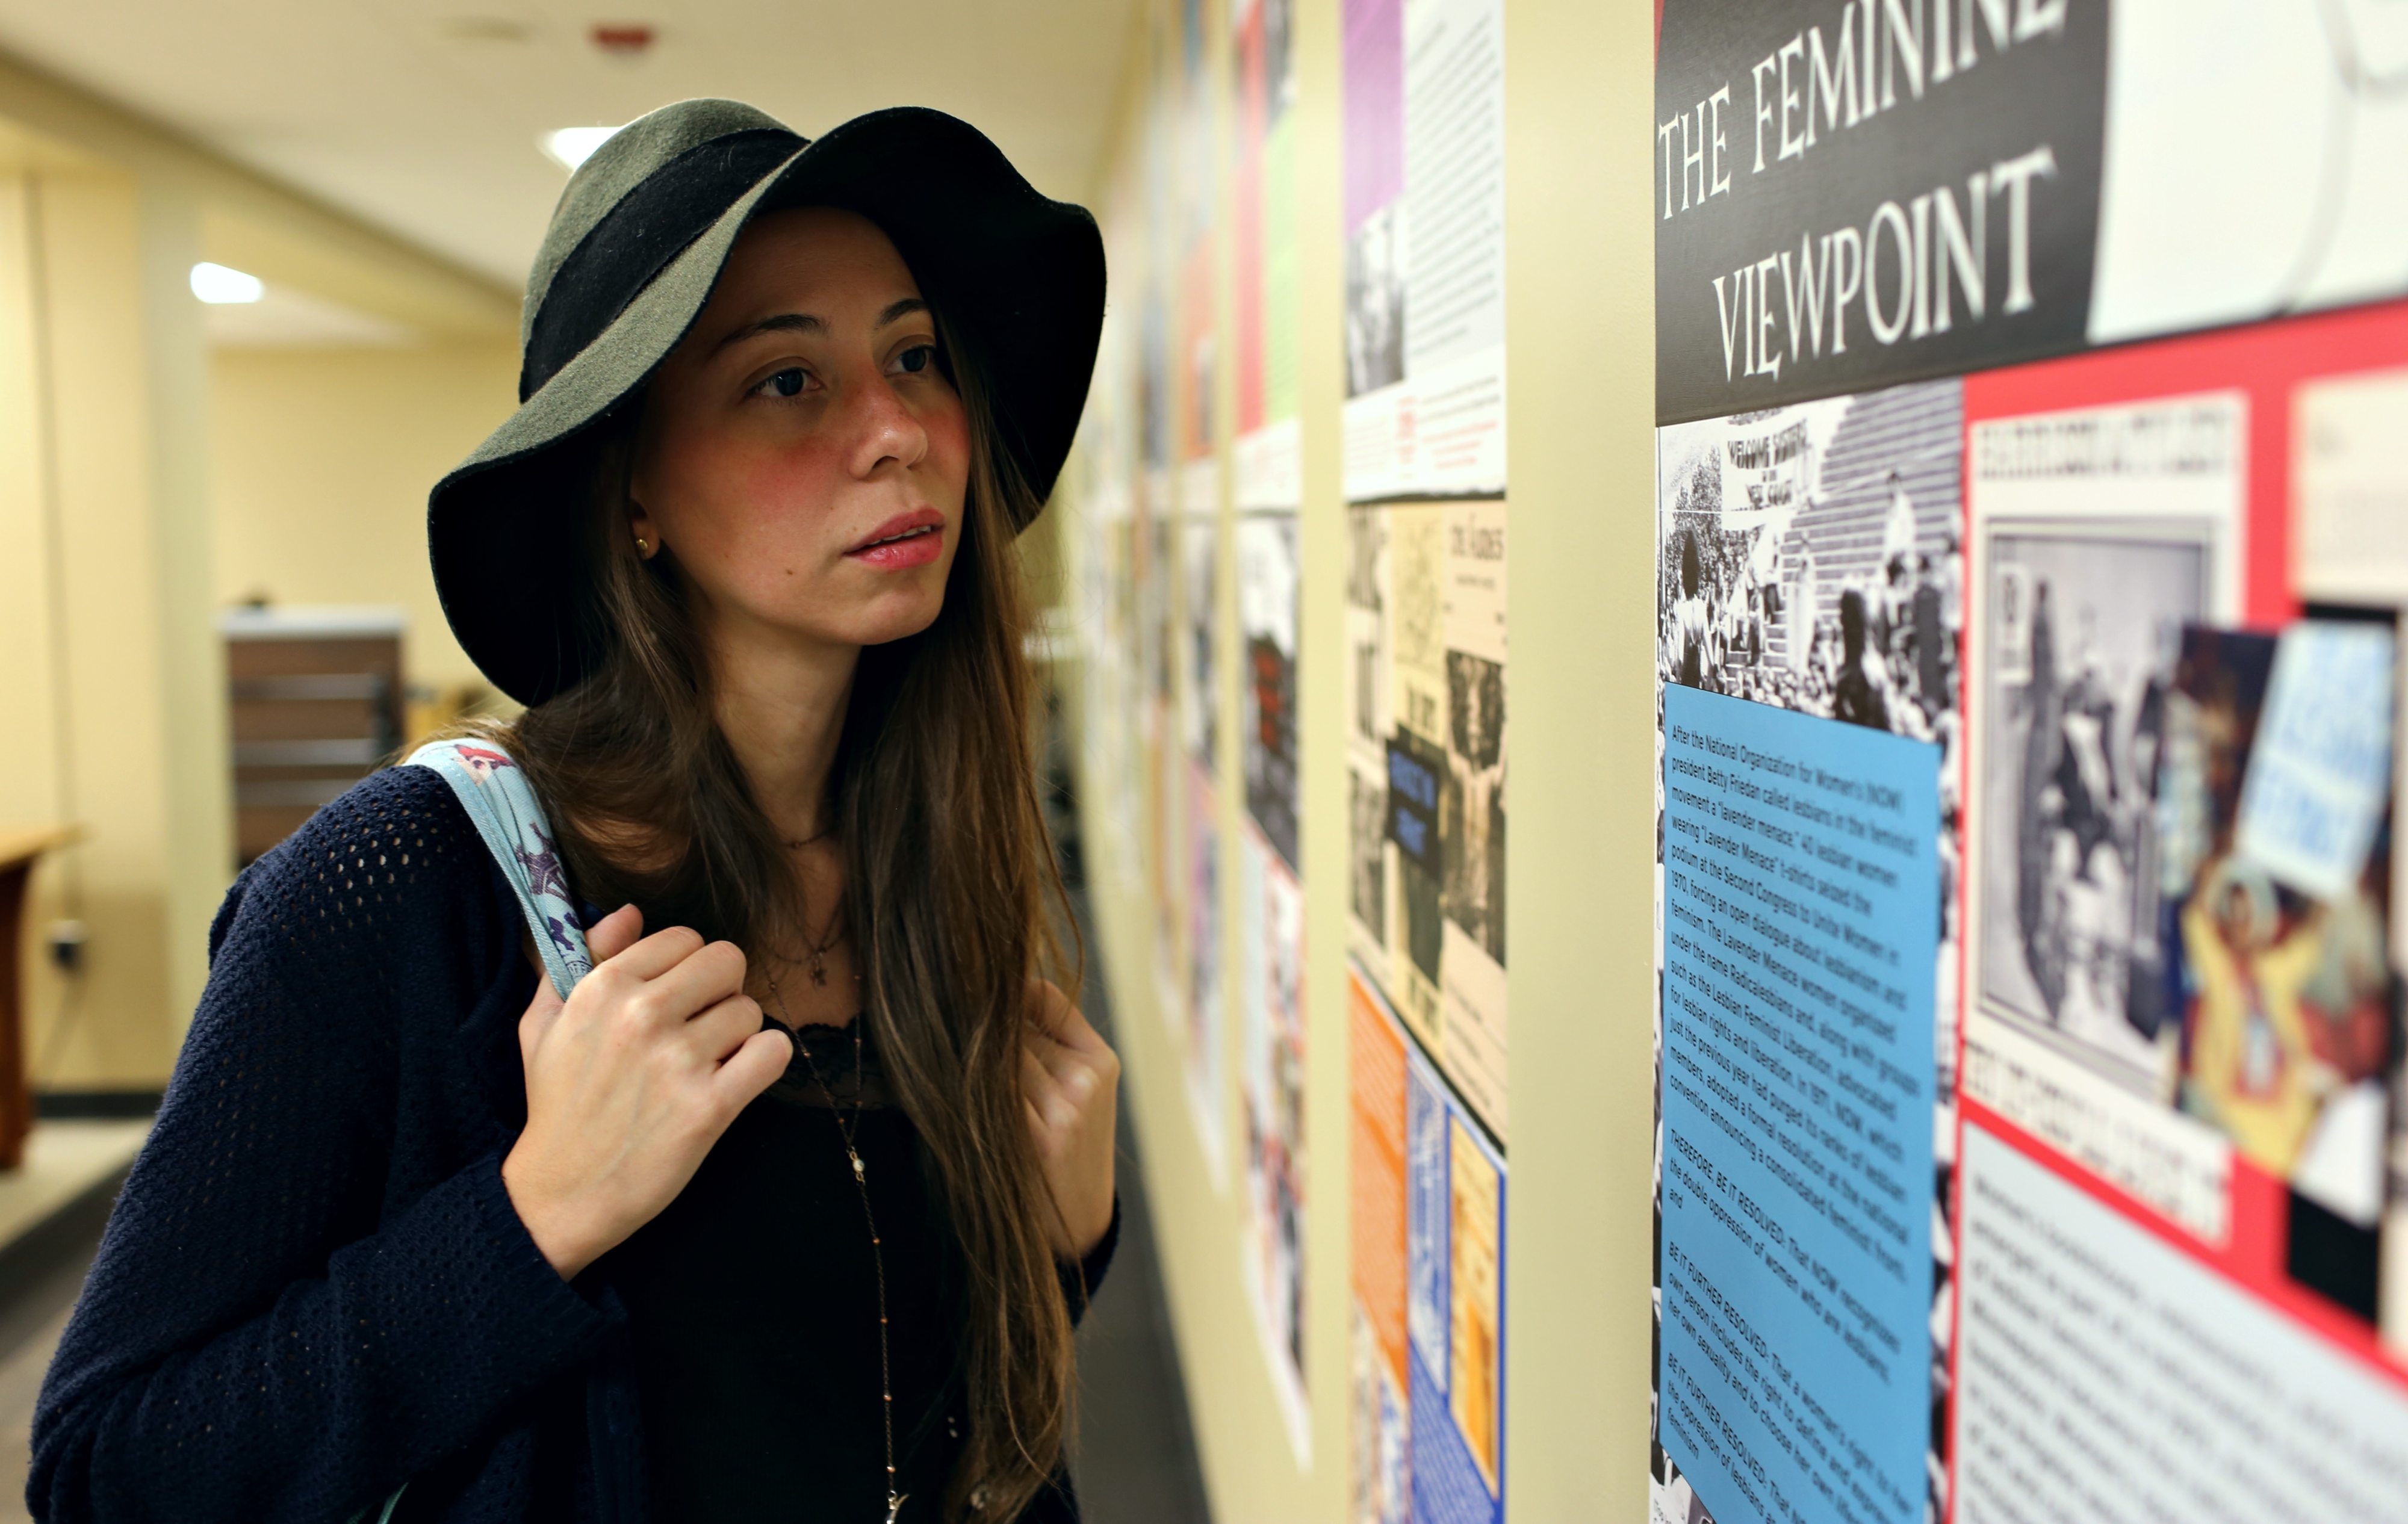 Photograph of a female-presenting person wearing a blue open knit sweater and black felt cloche hat holding a light blue backpack. This person is viewing the exhibit posters displayed on a wall.